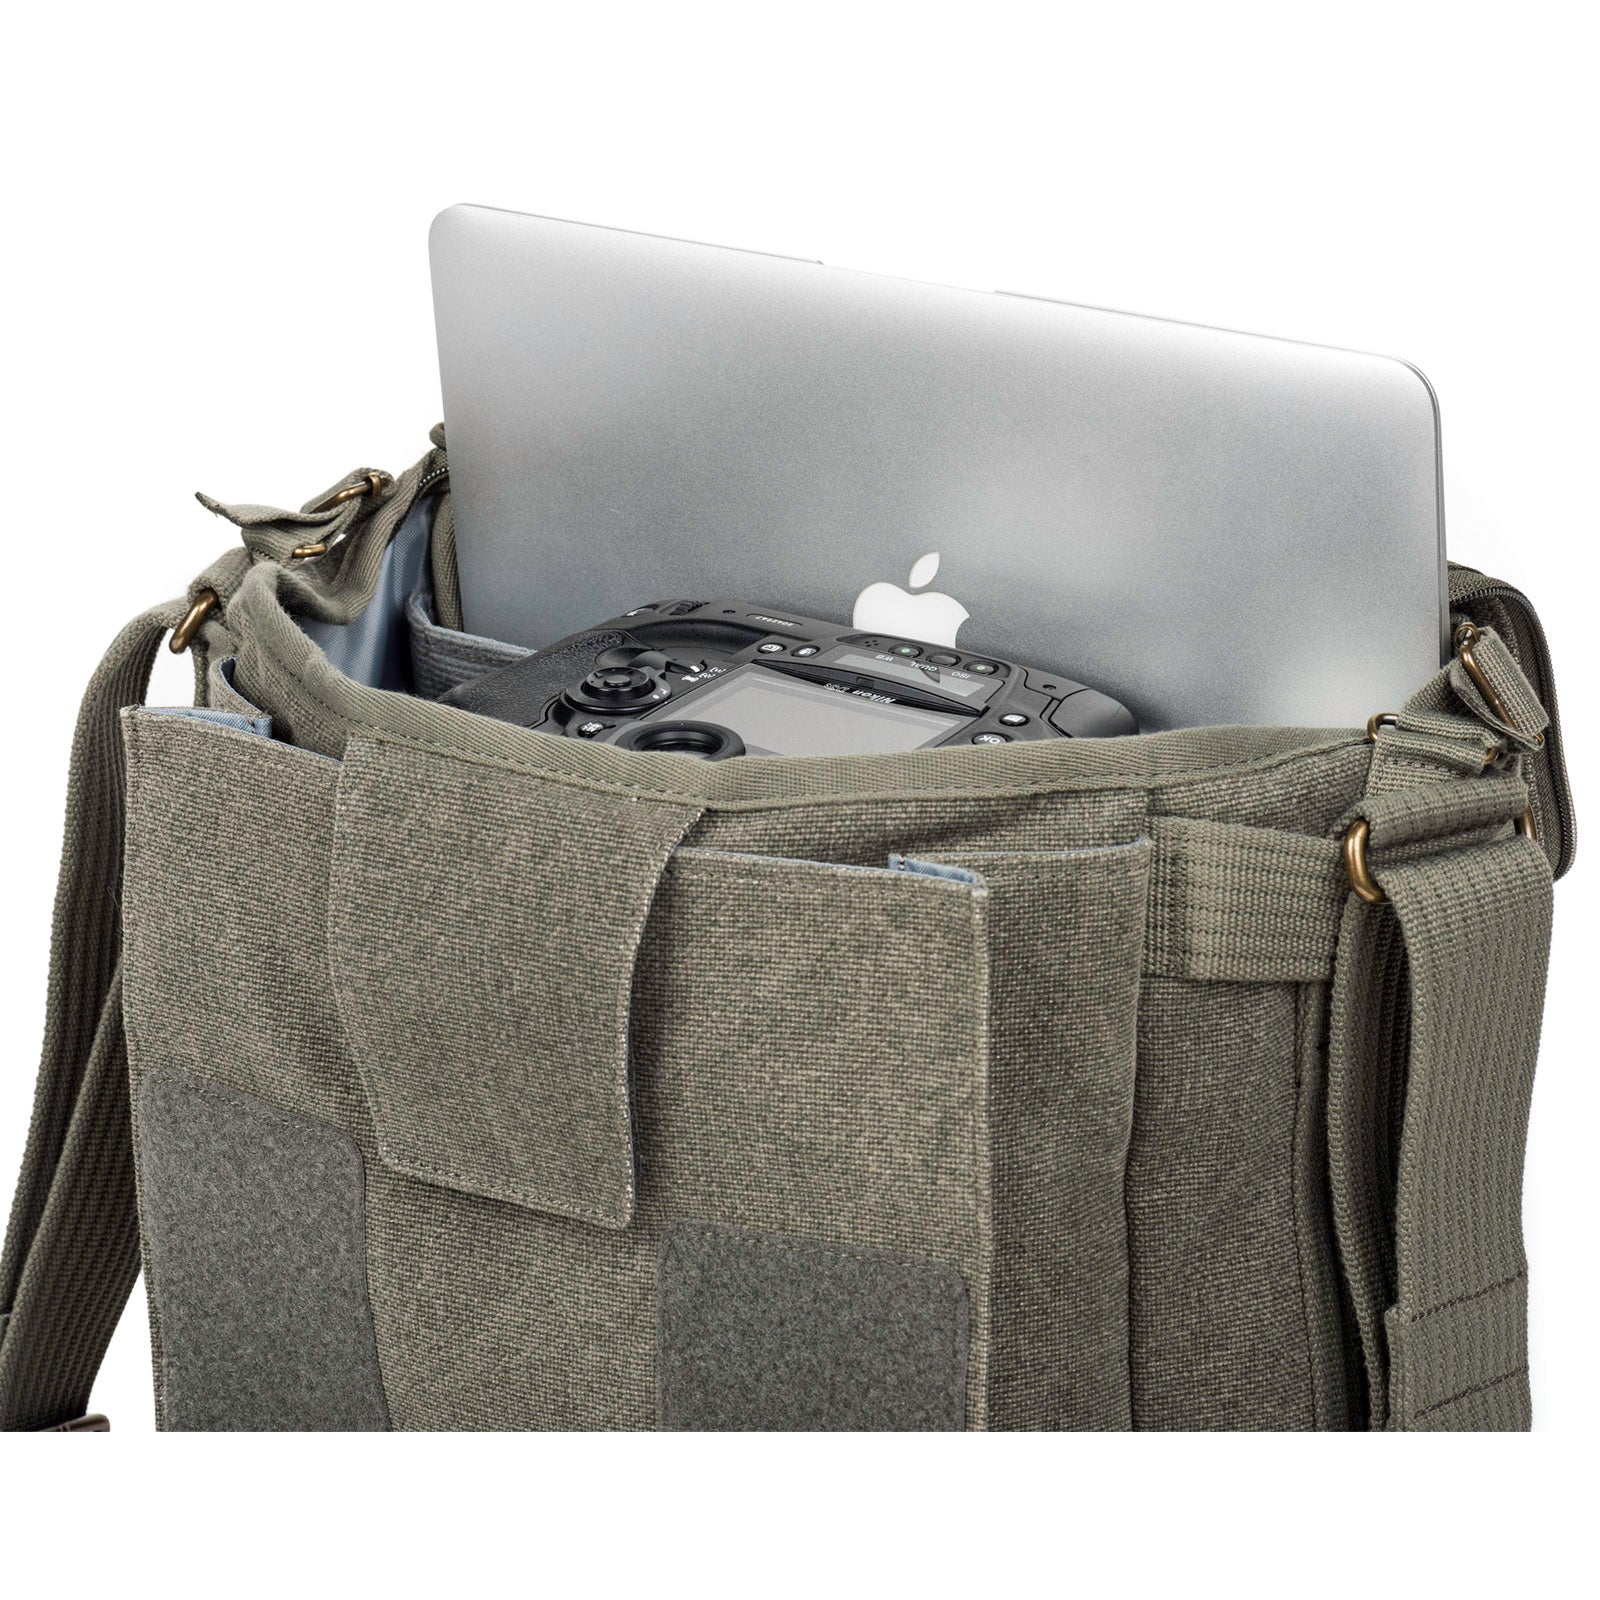 Dedicated pockets fit a 10" tablet and a 12" laptop